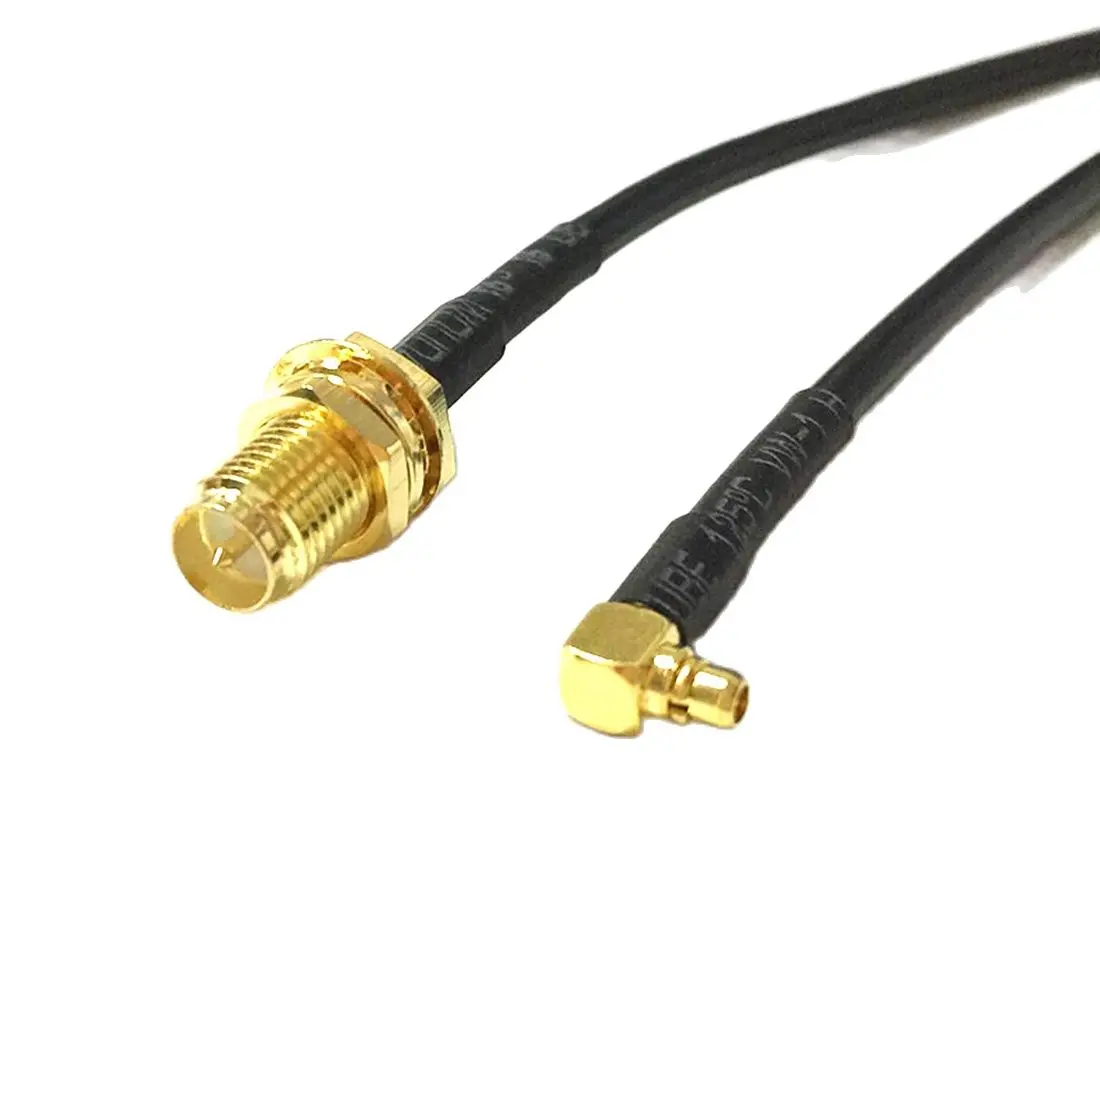 

New WIFI Modem Coaxial Cable RP-SMA Female Jack Nut Switch MMCX Male Plug Right Angle Connector RG174 Pigtail Adapter 20CM 8"